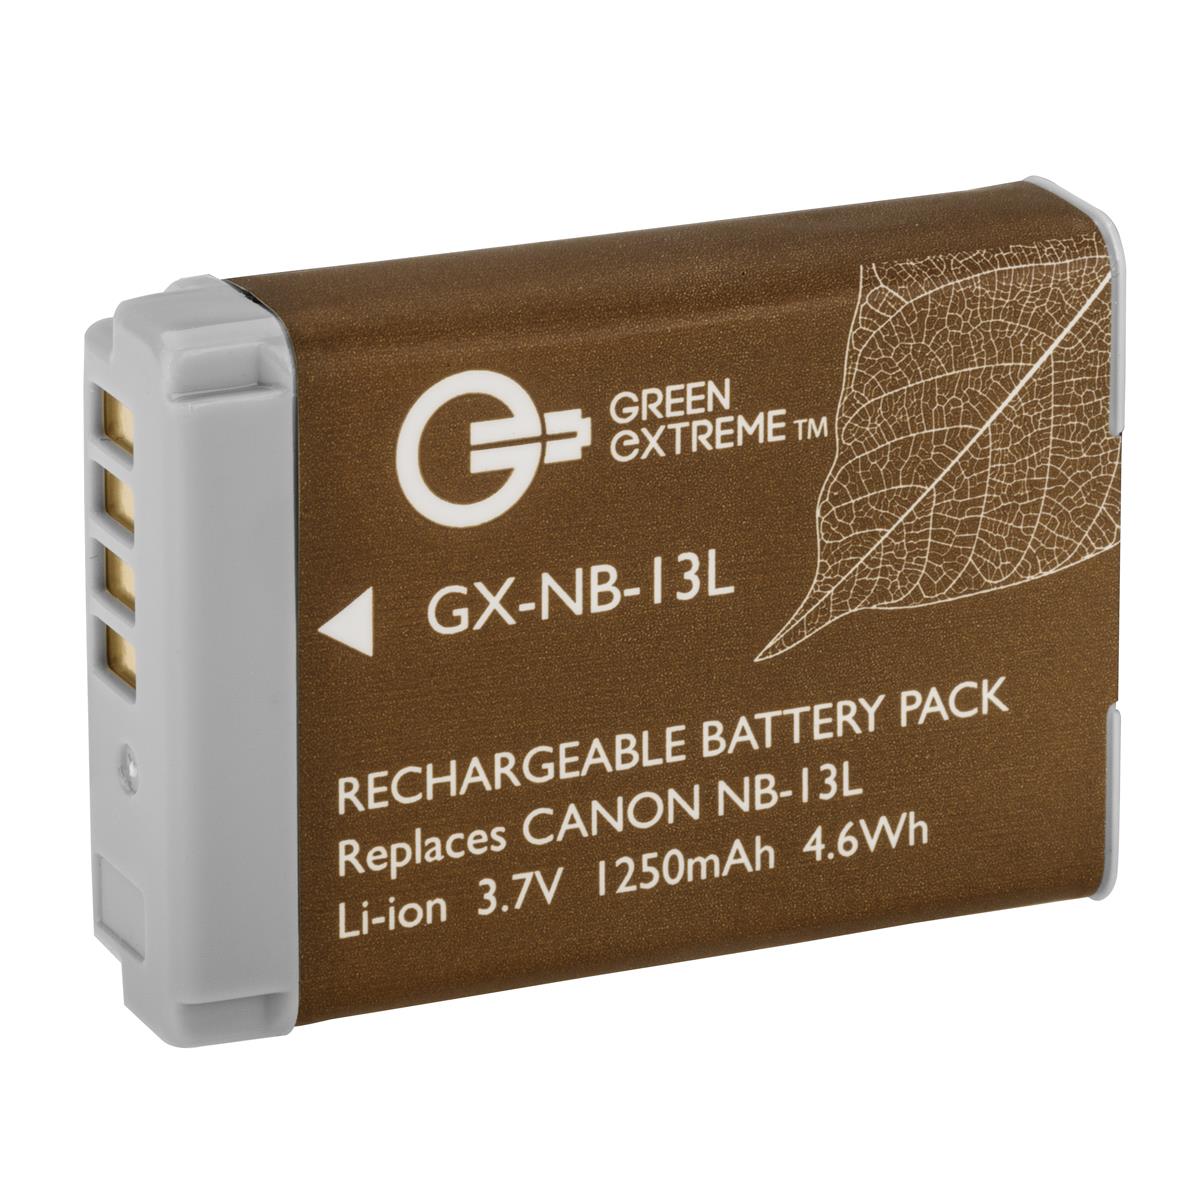 Image of Green Extreme NB-13L Lithium-Ion Battery Pack (3.7V 1250mAh)